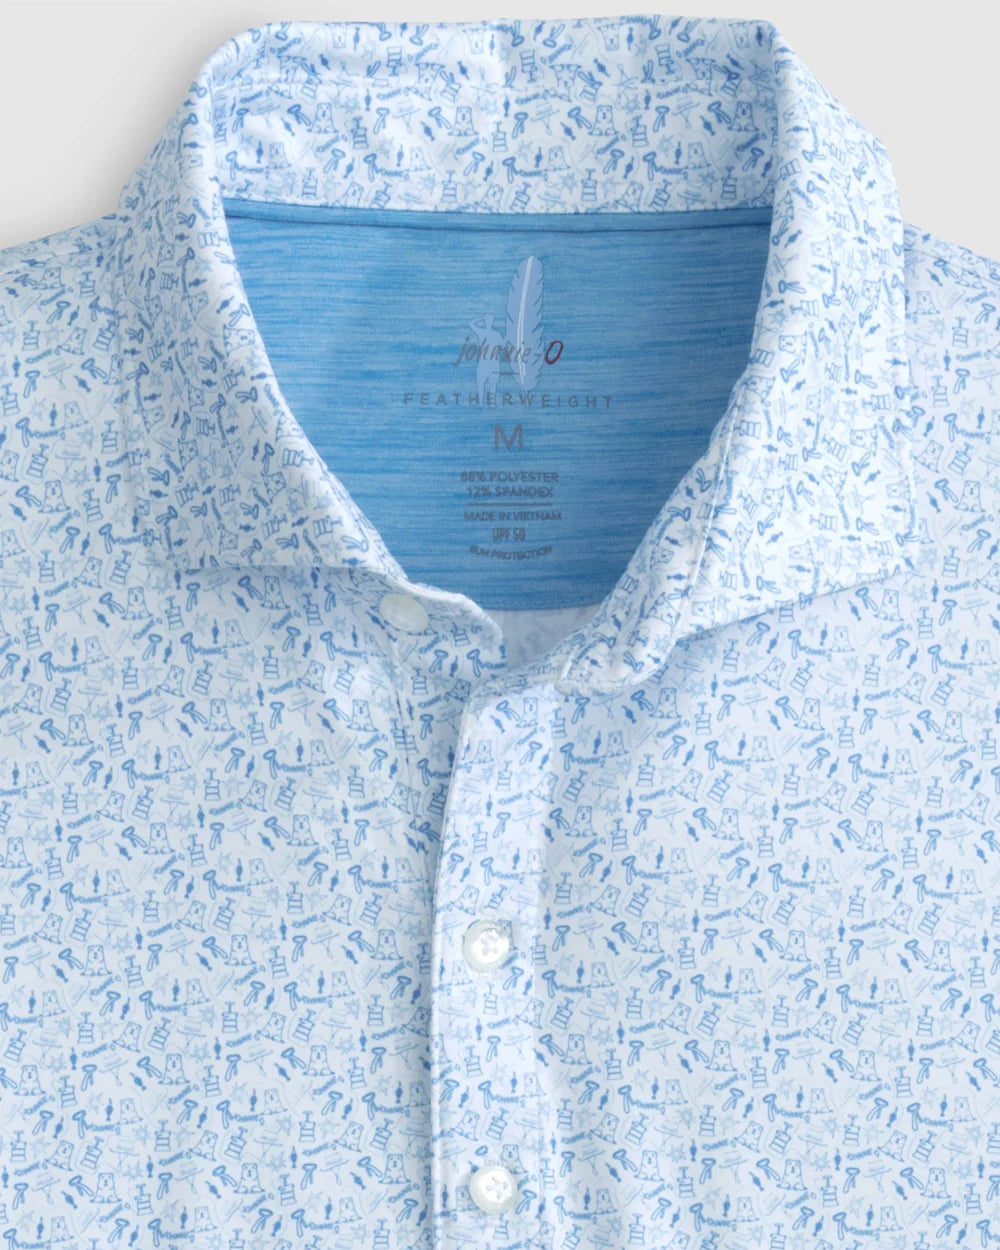 Johnnie-O Featherweight I Never Slice Printed Performance Polo